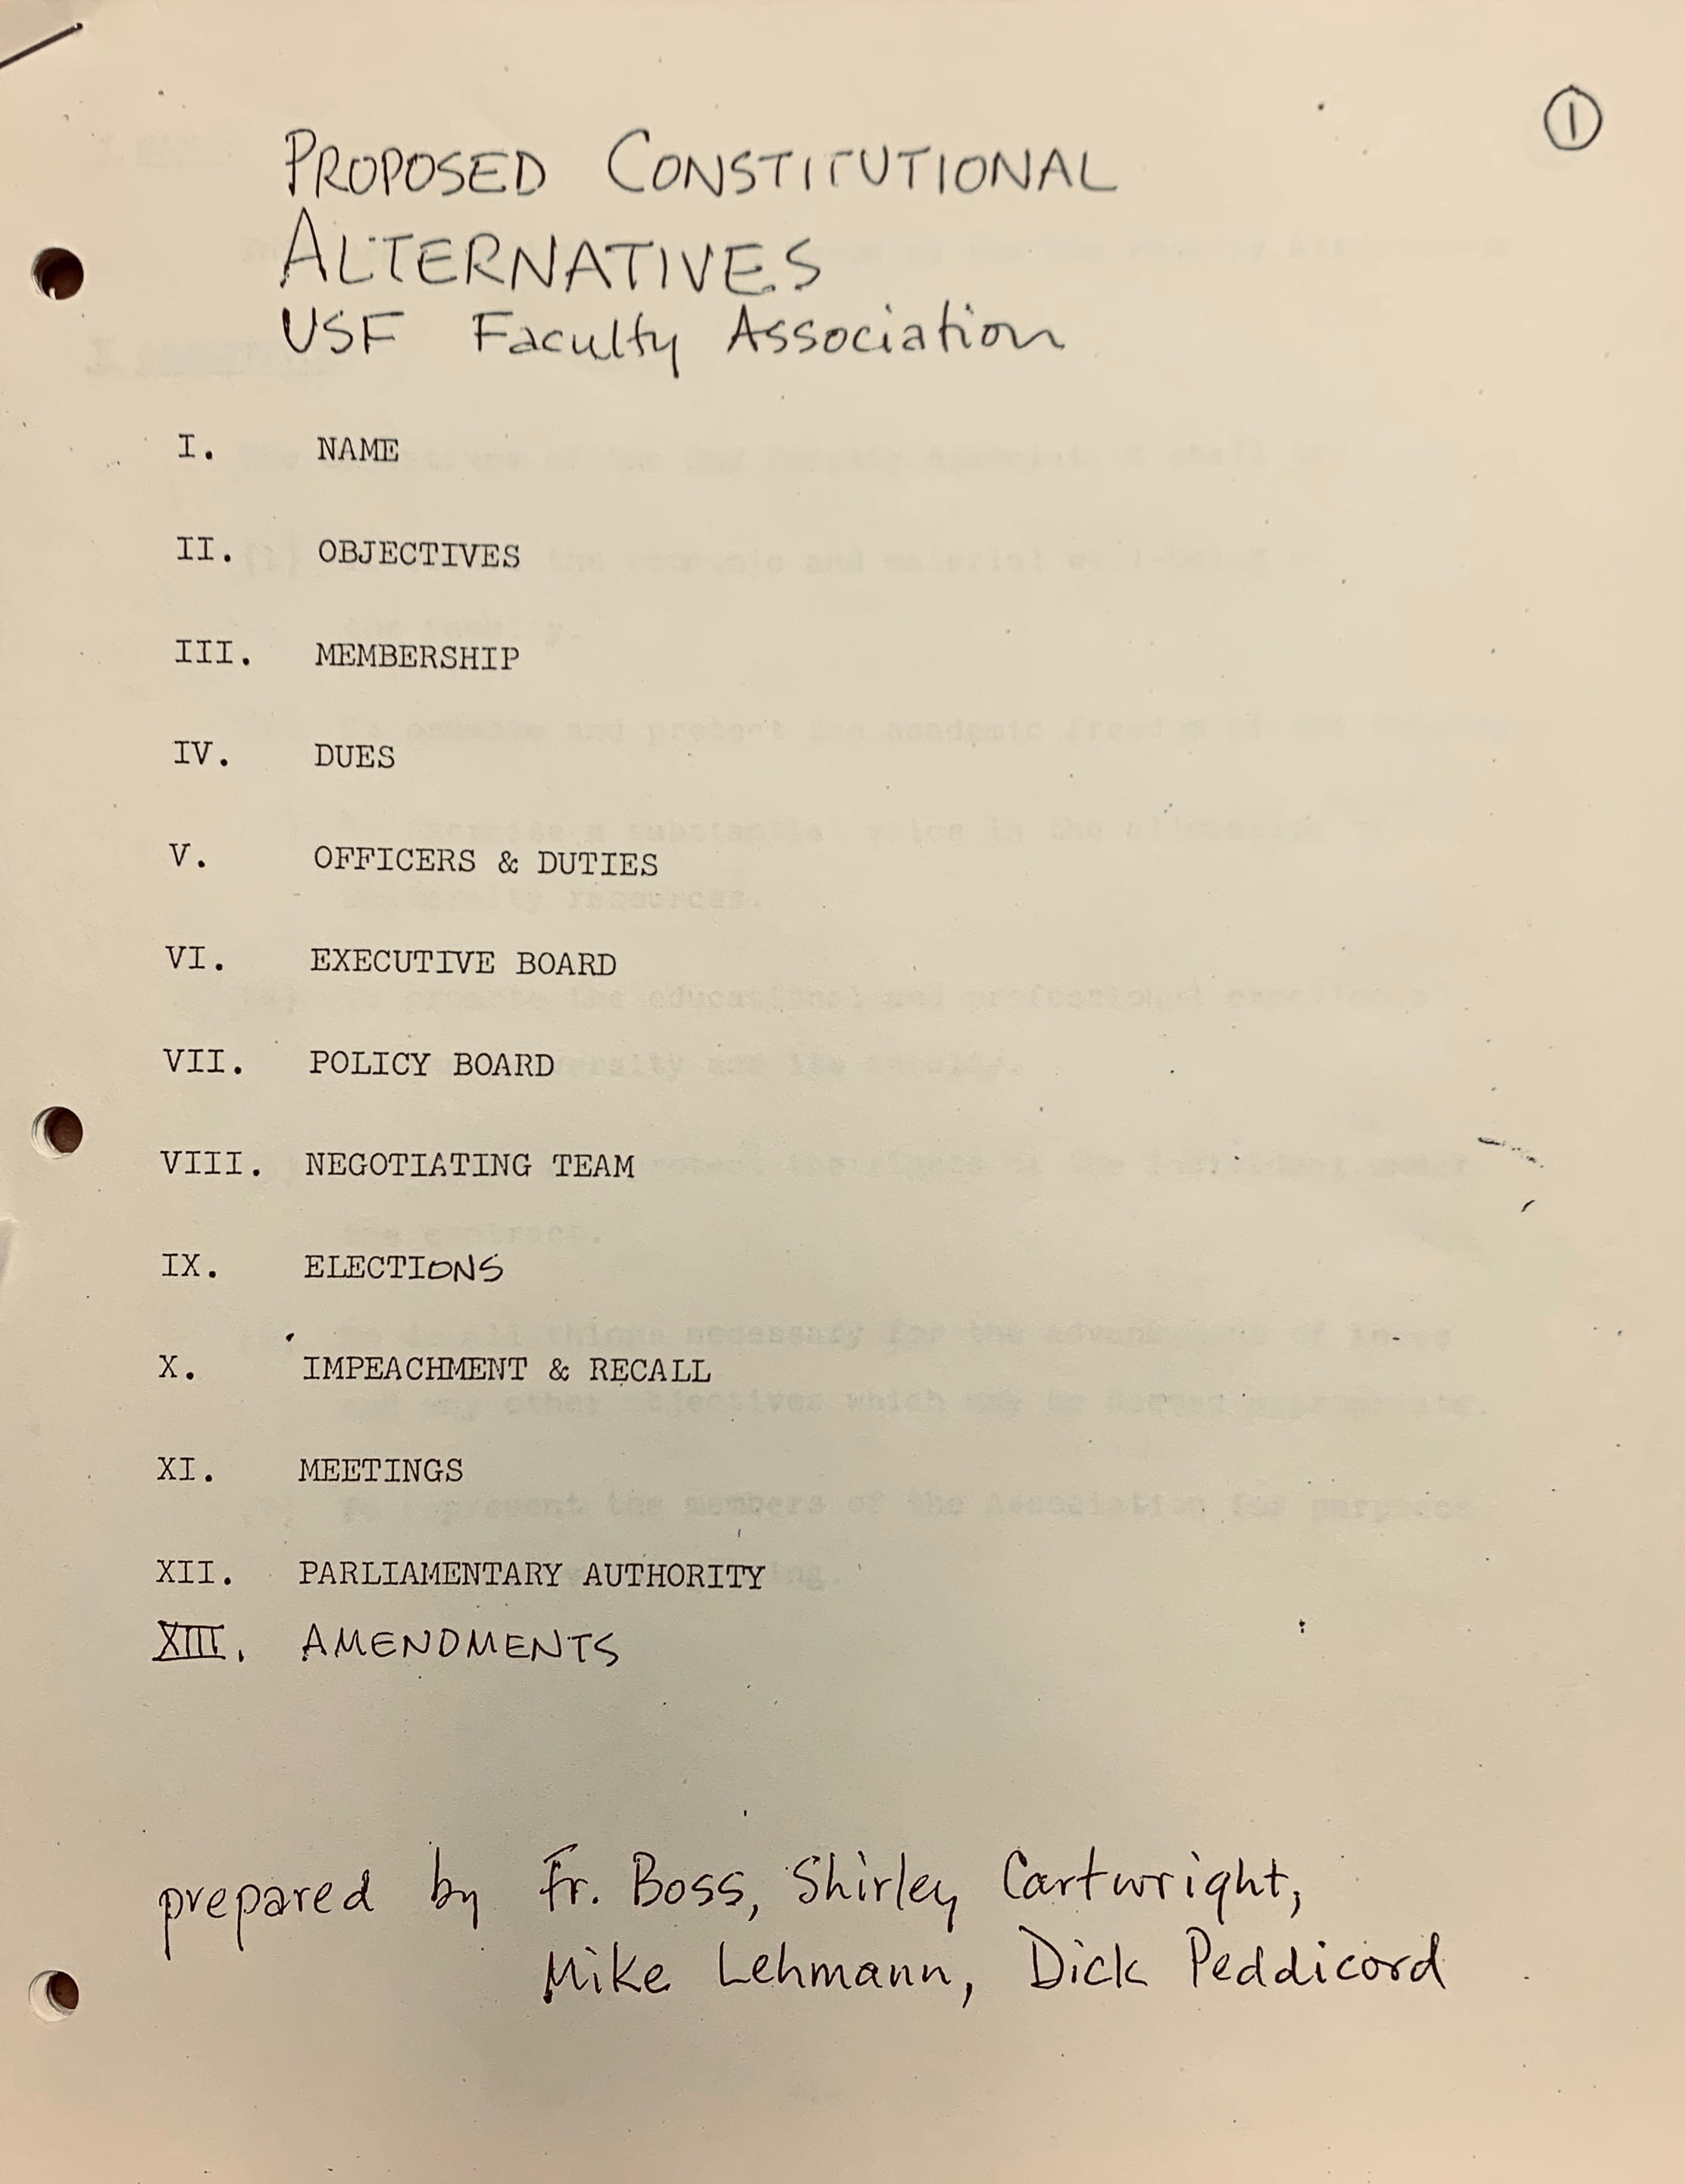 USFFA Early Constitution 1975